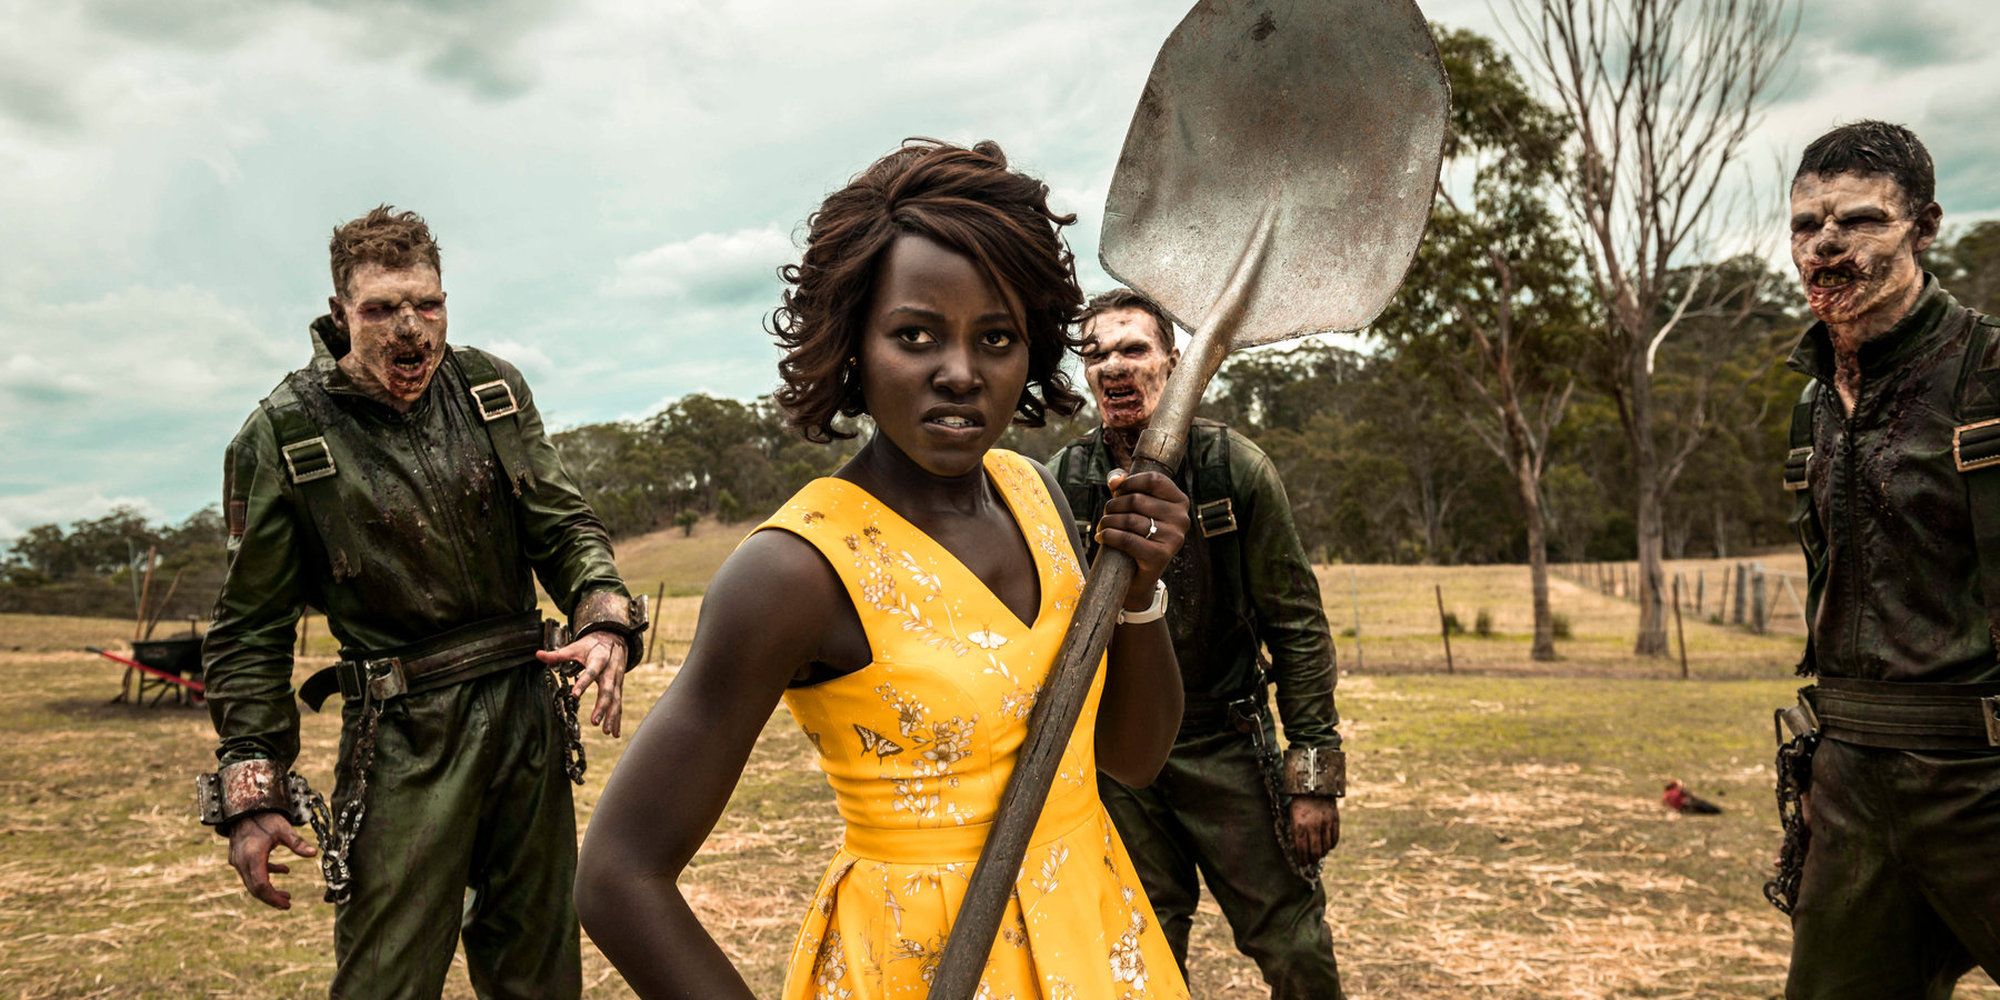 Zombies and Lupita Nyong'o in Little Monsters